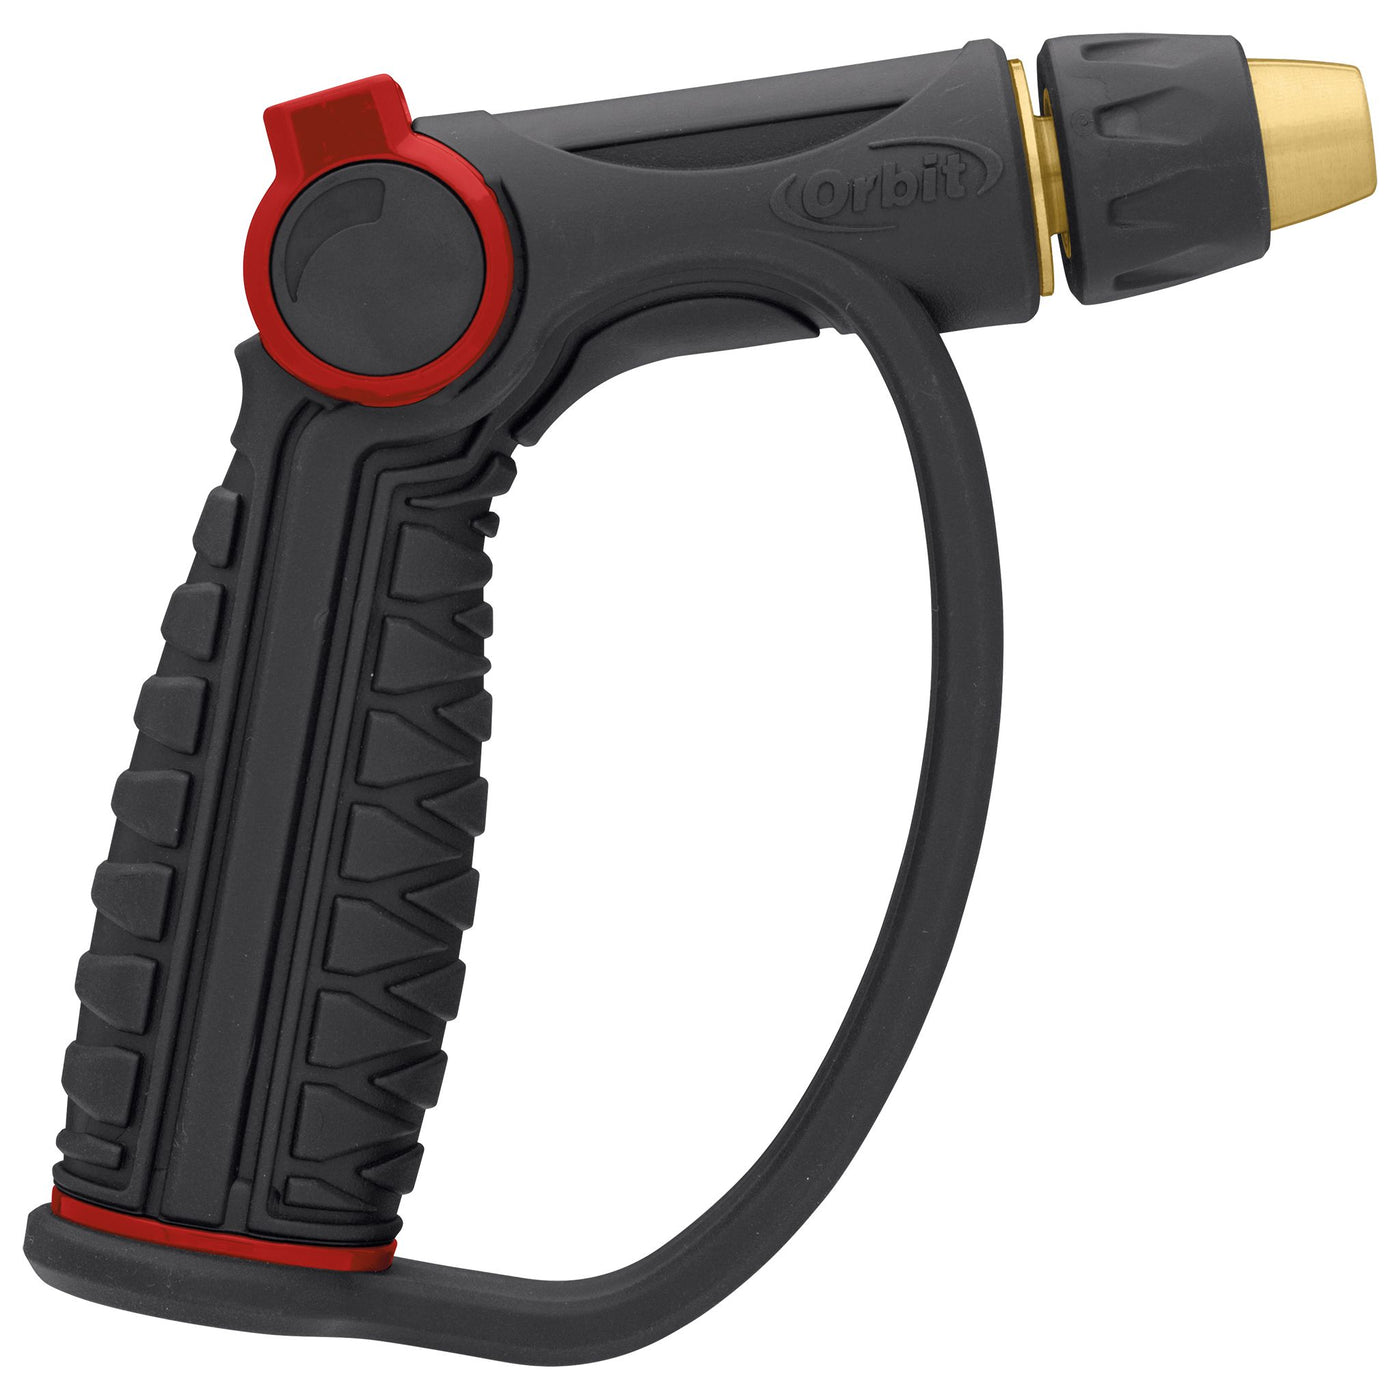 Side view of a black and red pro-flo adjustable spray thumb control d-grip brass tip watering nozzle.